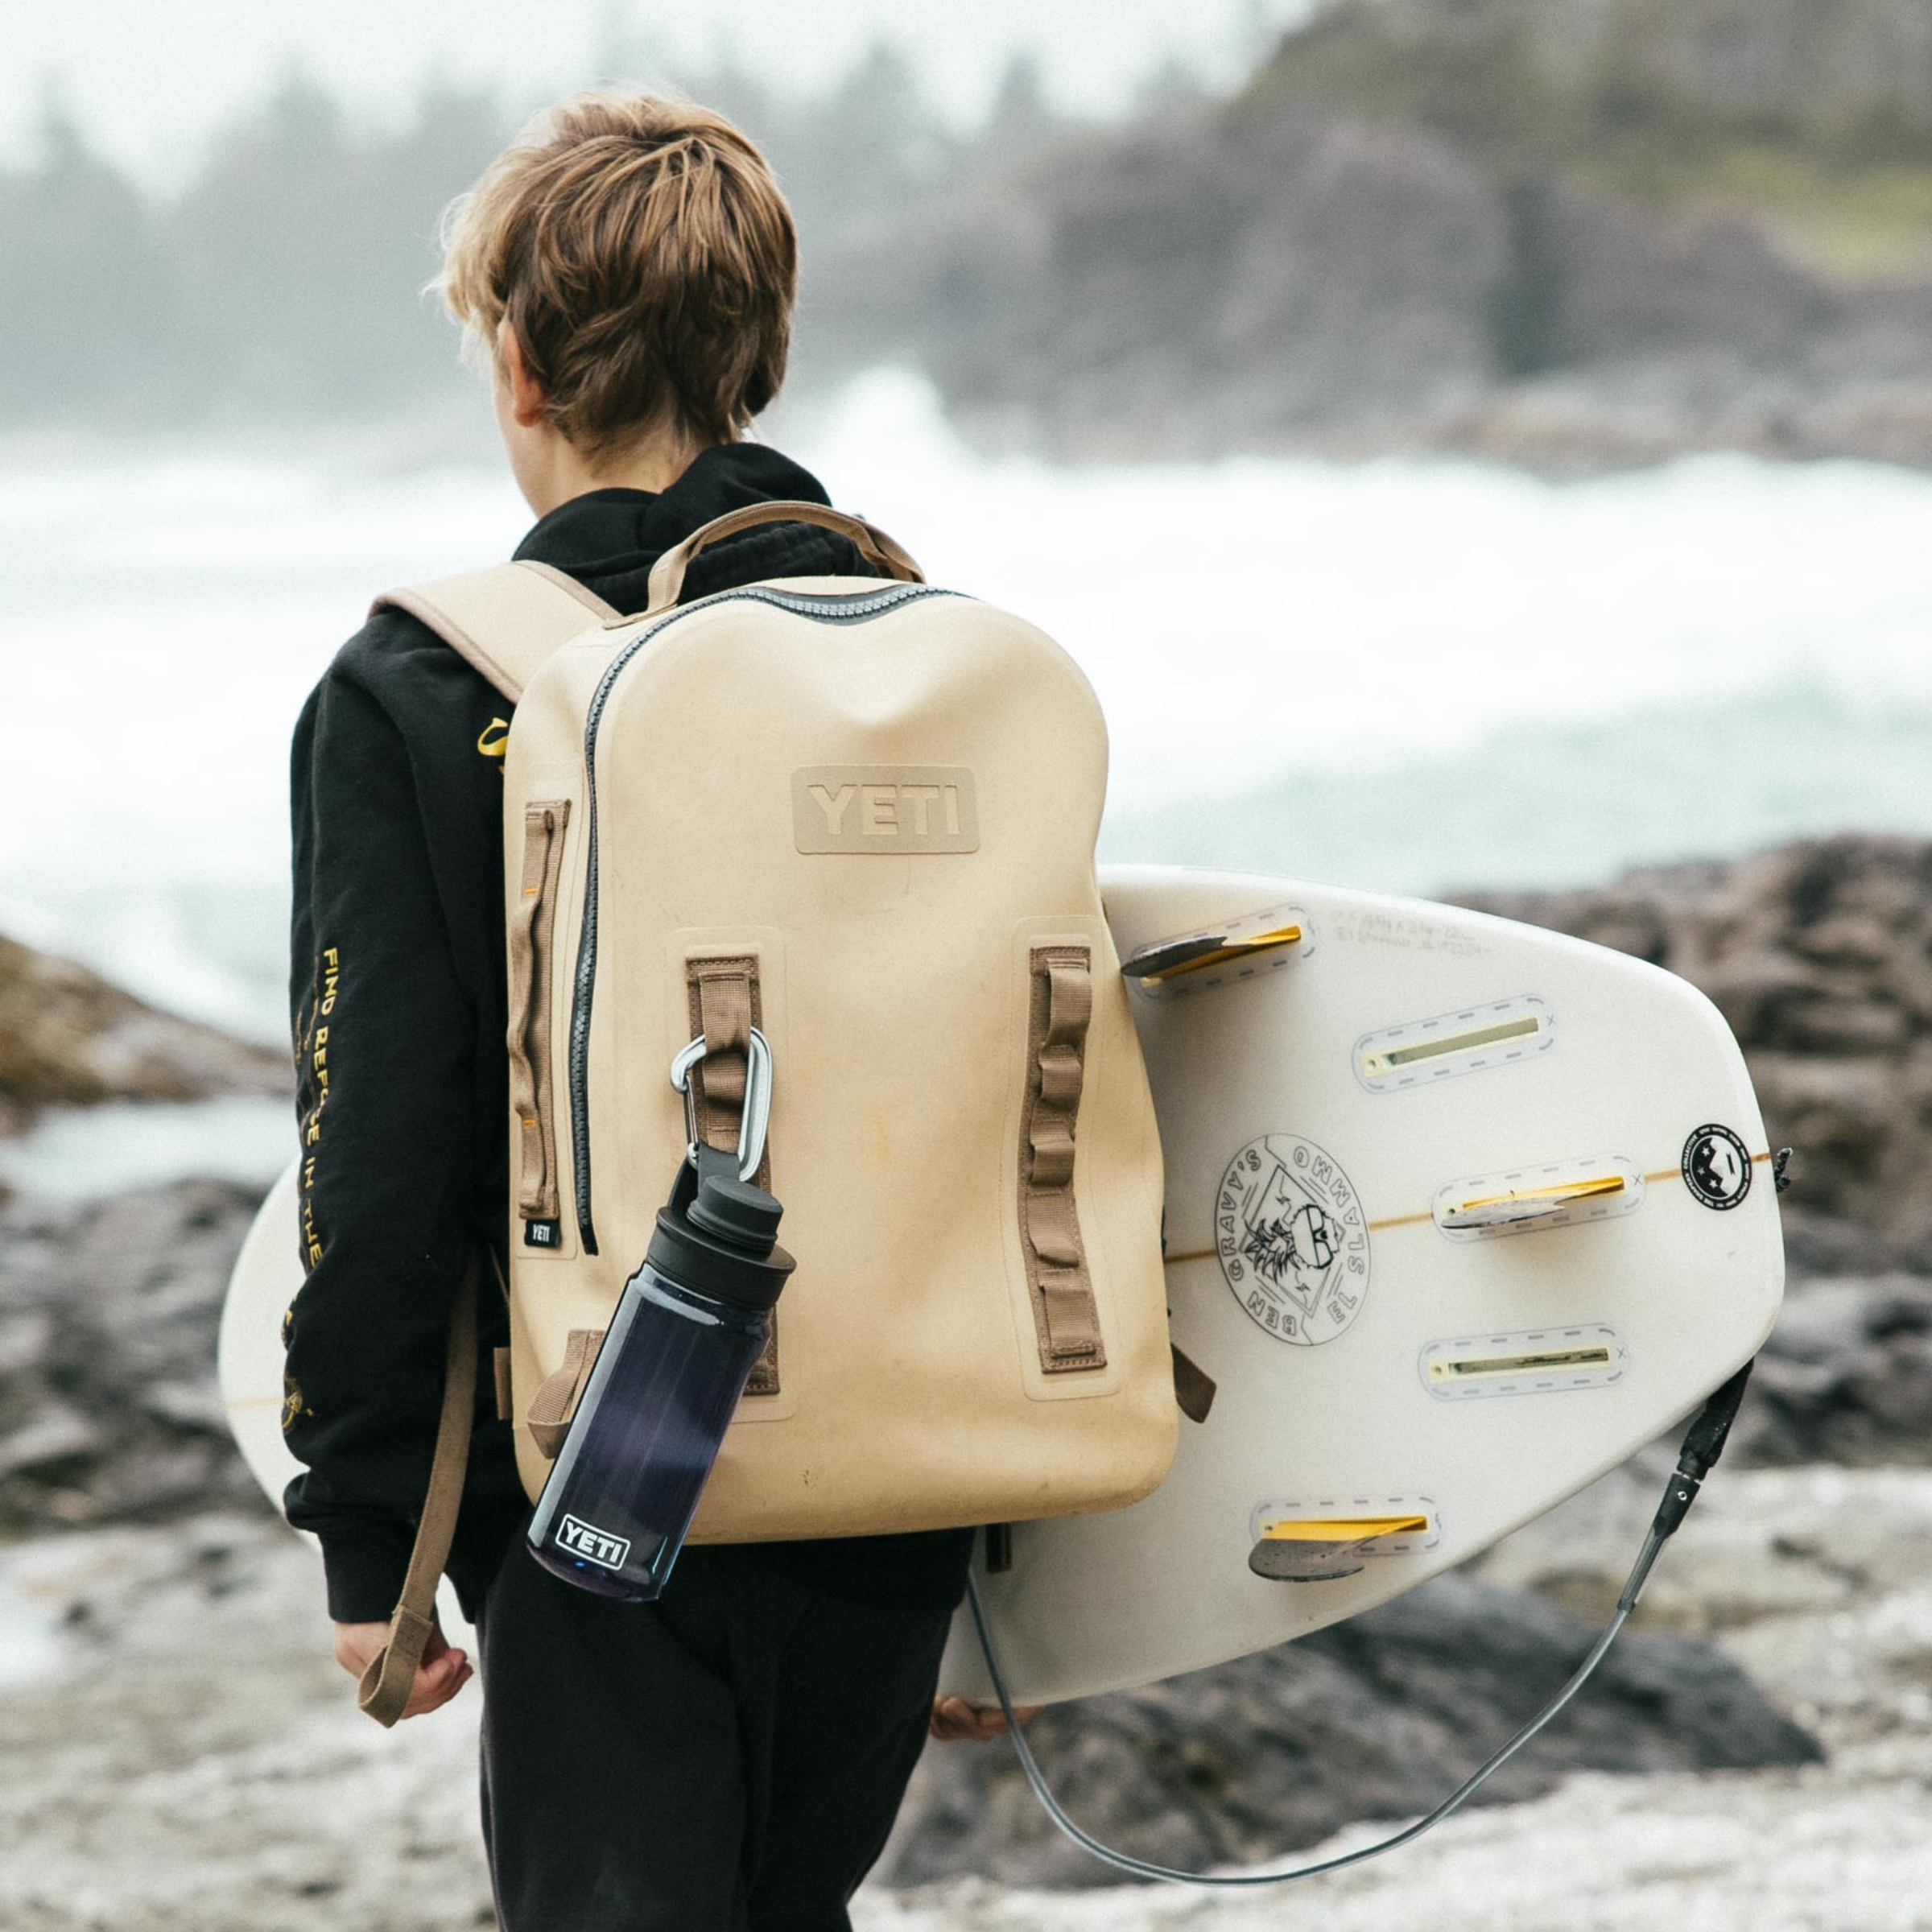 https://www.onthewater.com/wp-content/uploads/2023/07/Yonder-20oz-Tether-Cap-Surf-Lifestyle-.png